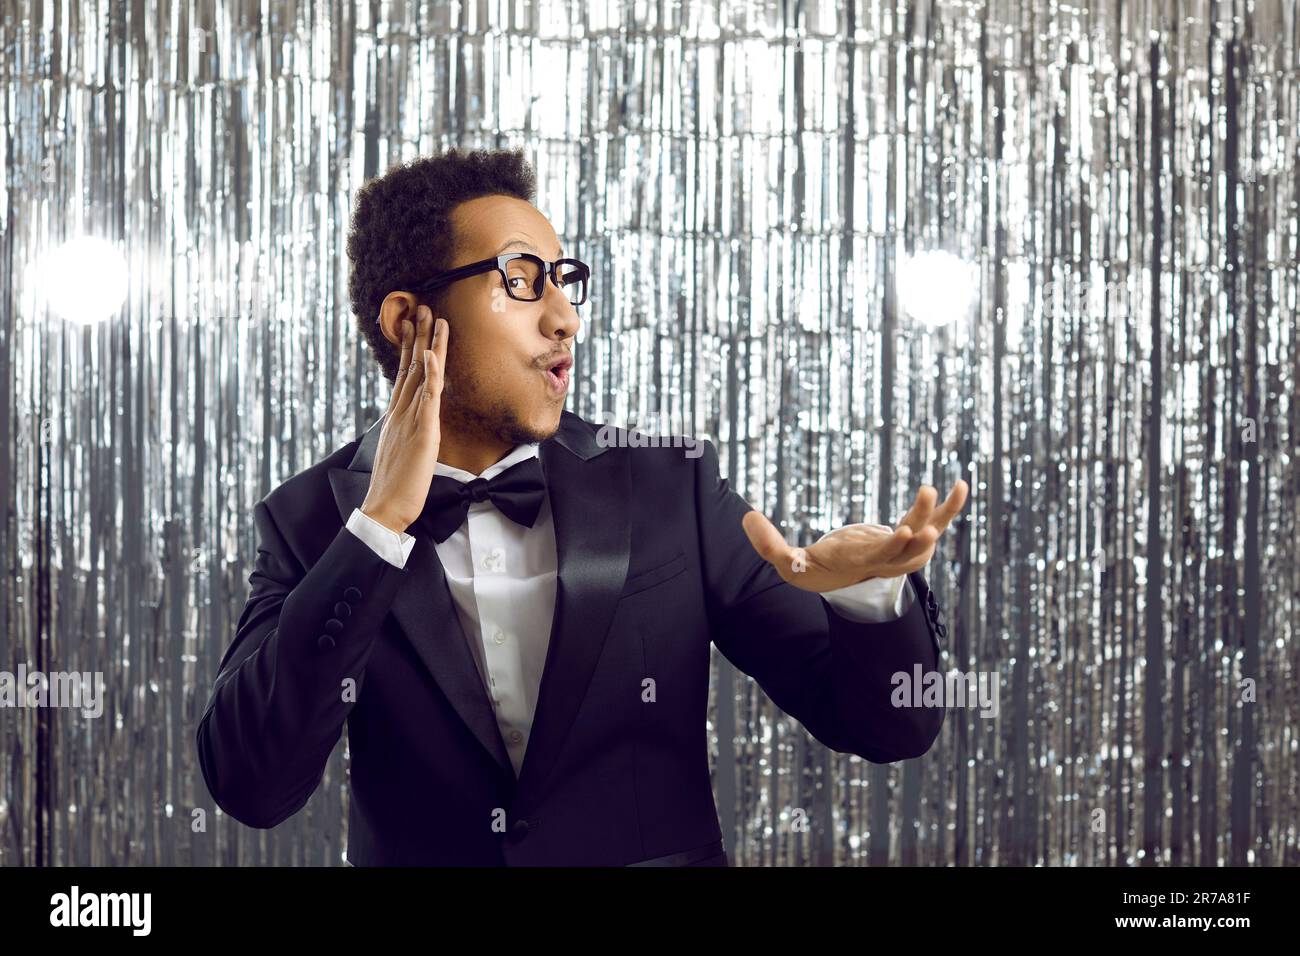 Funny cheerful black guy in suit dancing at disco party like DJ who's mixing music Stock Photo